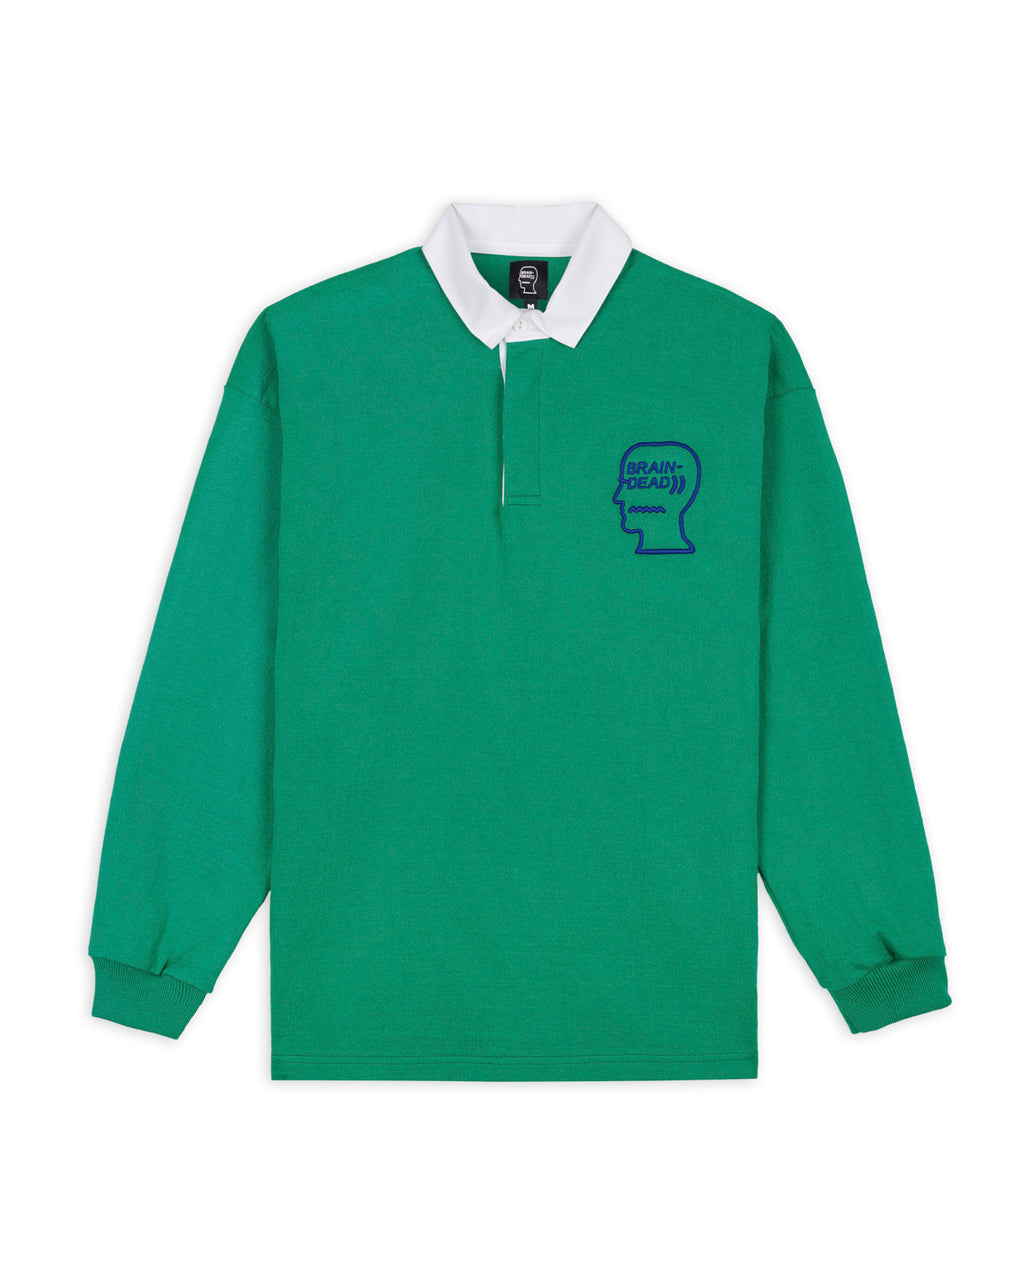 3D Embroidered Logohead Rugby Shirt - Green